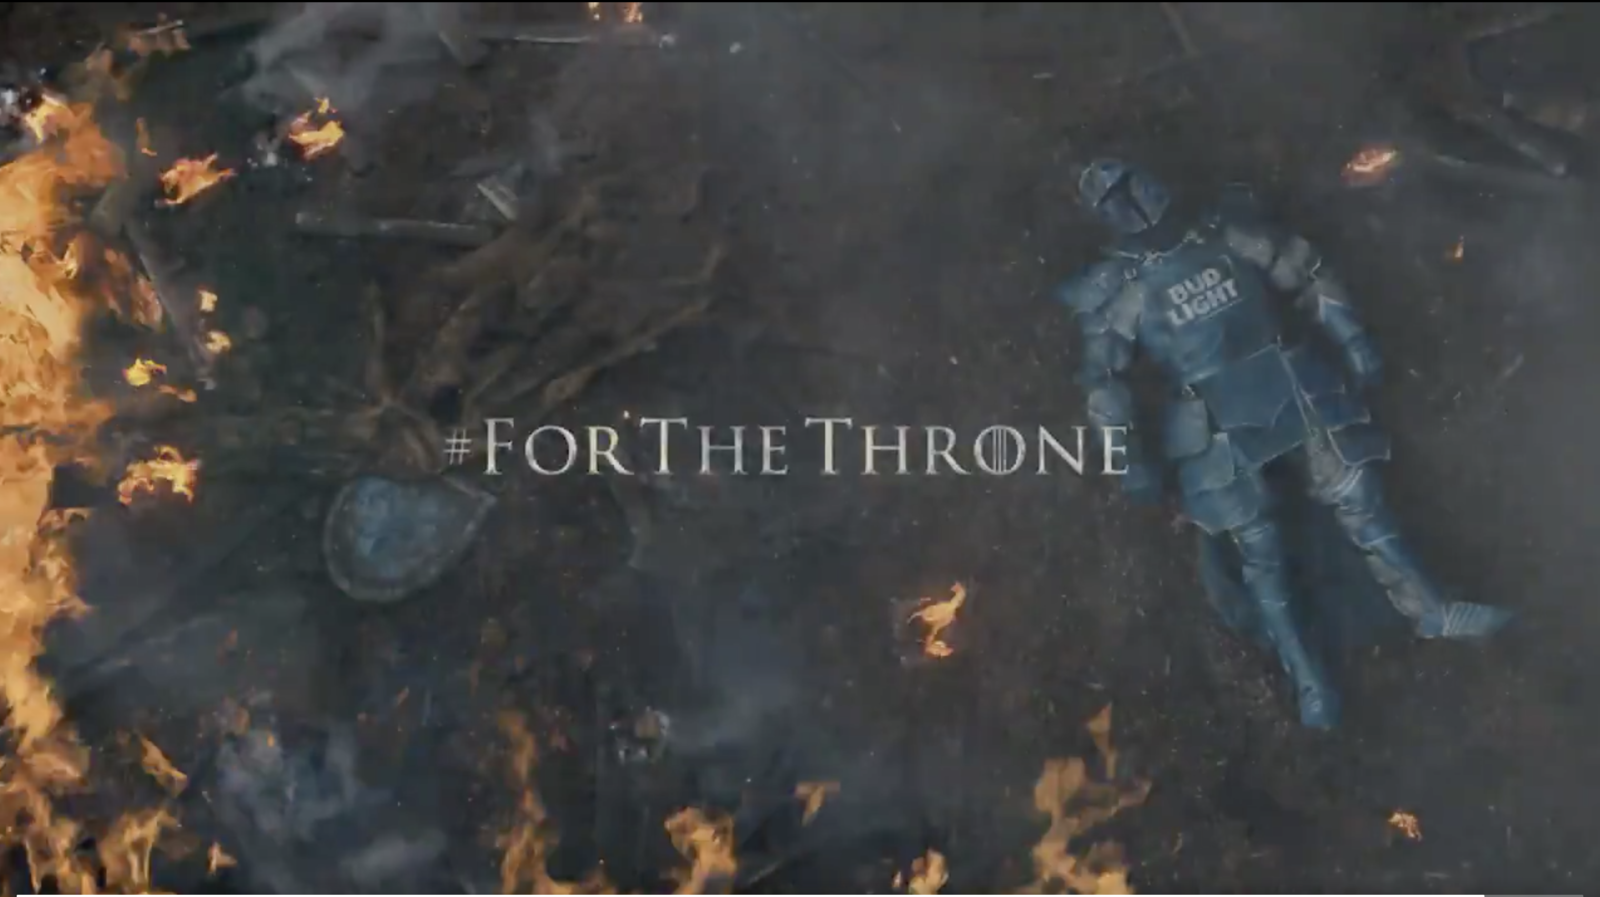 Light And HBO Teamed Up A "Game Of Thrones"–Themed Bowl Ad